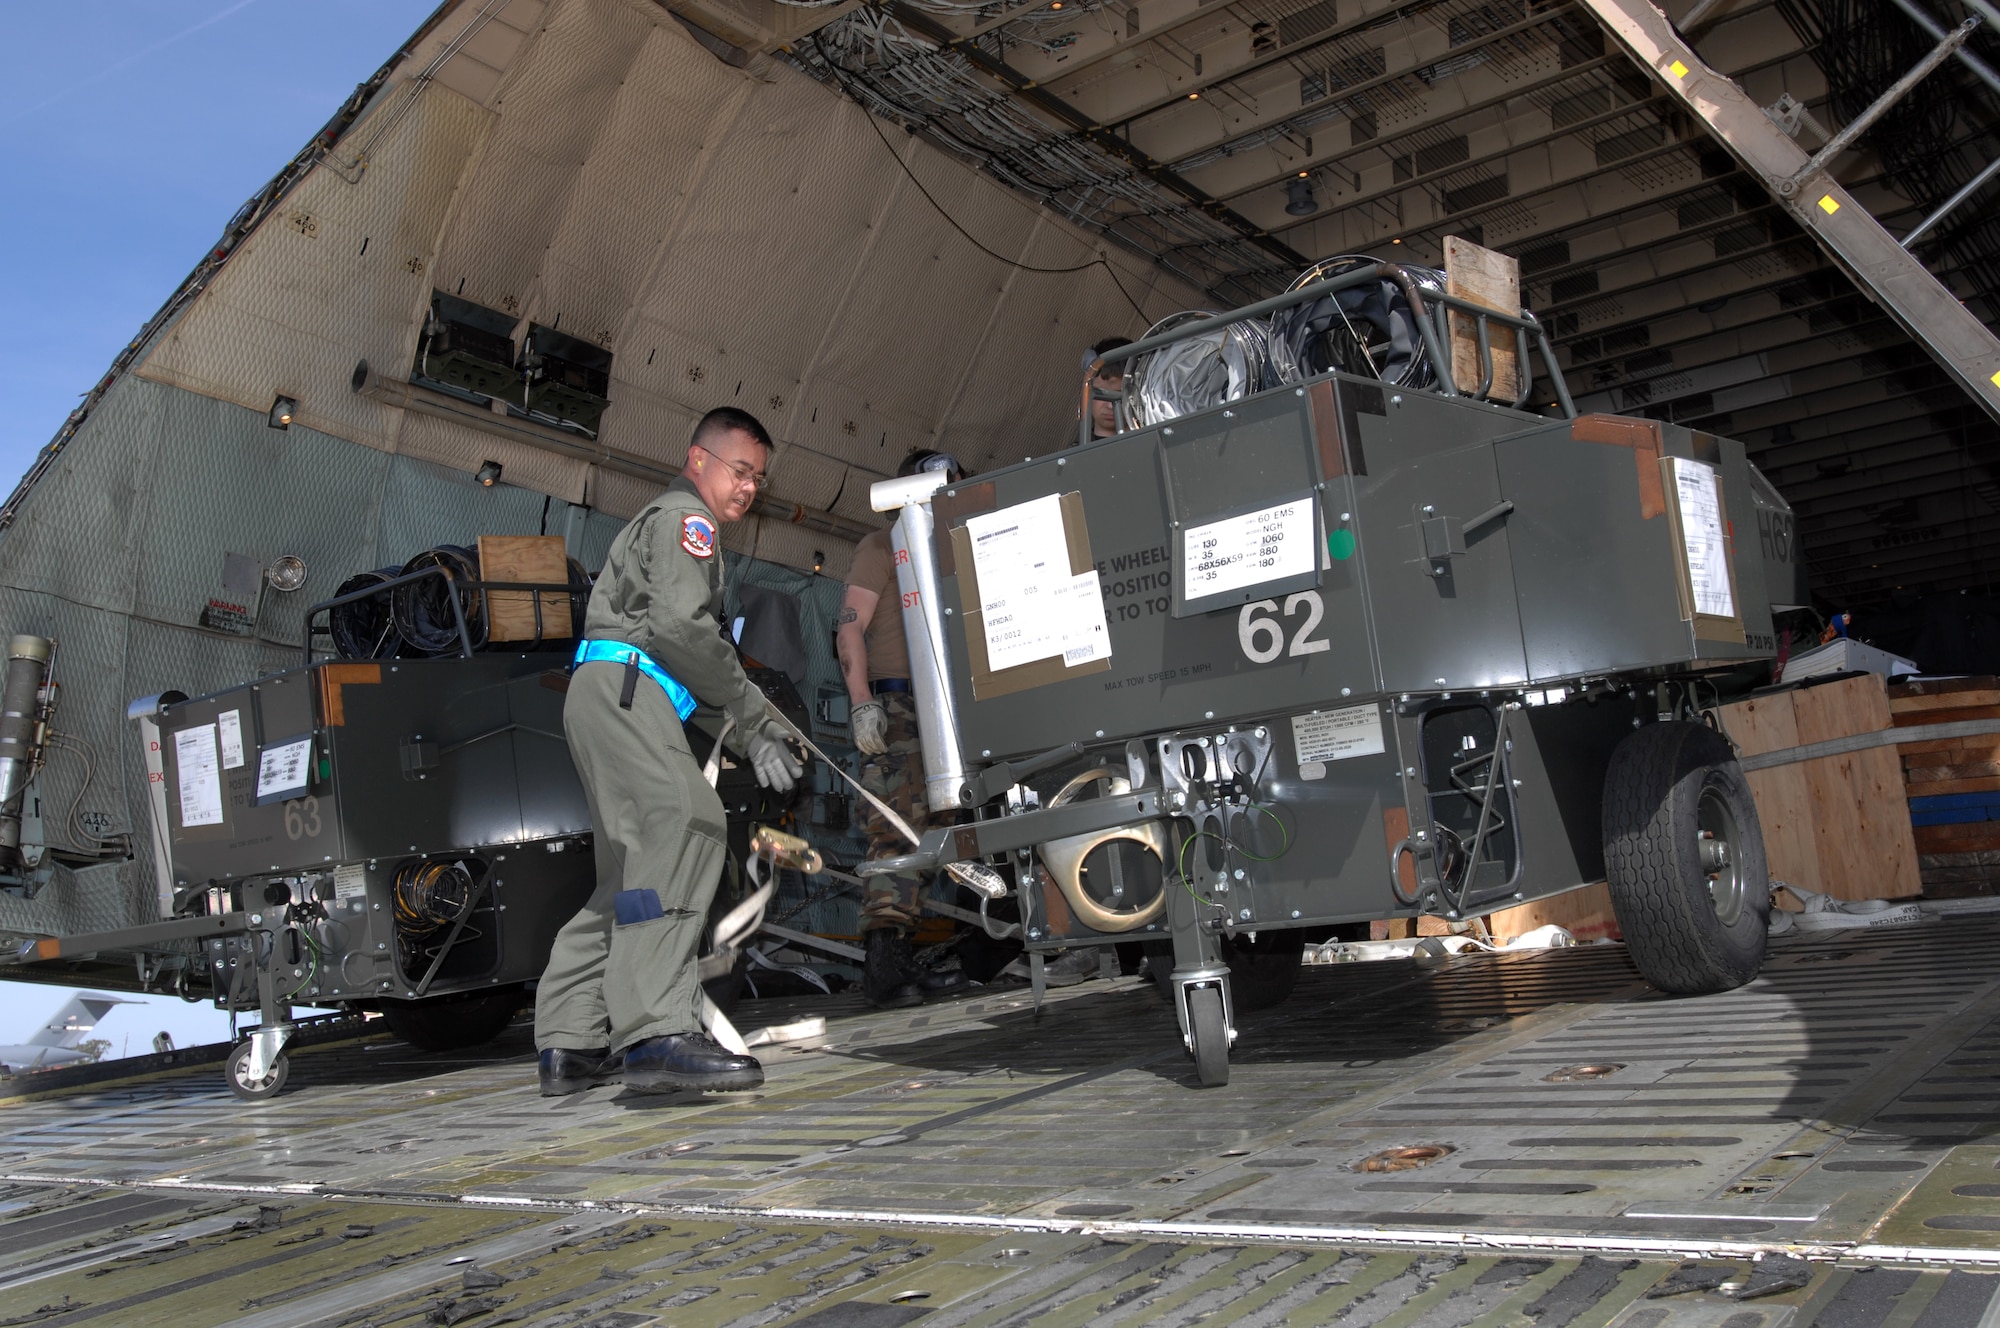 Master Sgt. Ed Pena, 22nd Airlift Squadron C-5 loadmaster, uploads cargo onto the aircraft during the Crisis Look 07-02 deployment exercise held on Travis Air Force Base, Calif. (U. S. Air Force photo by Nan Wylie)